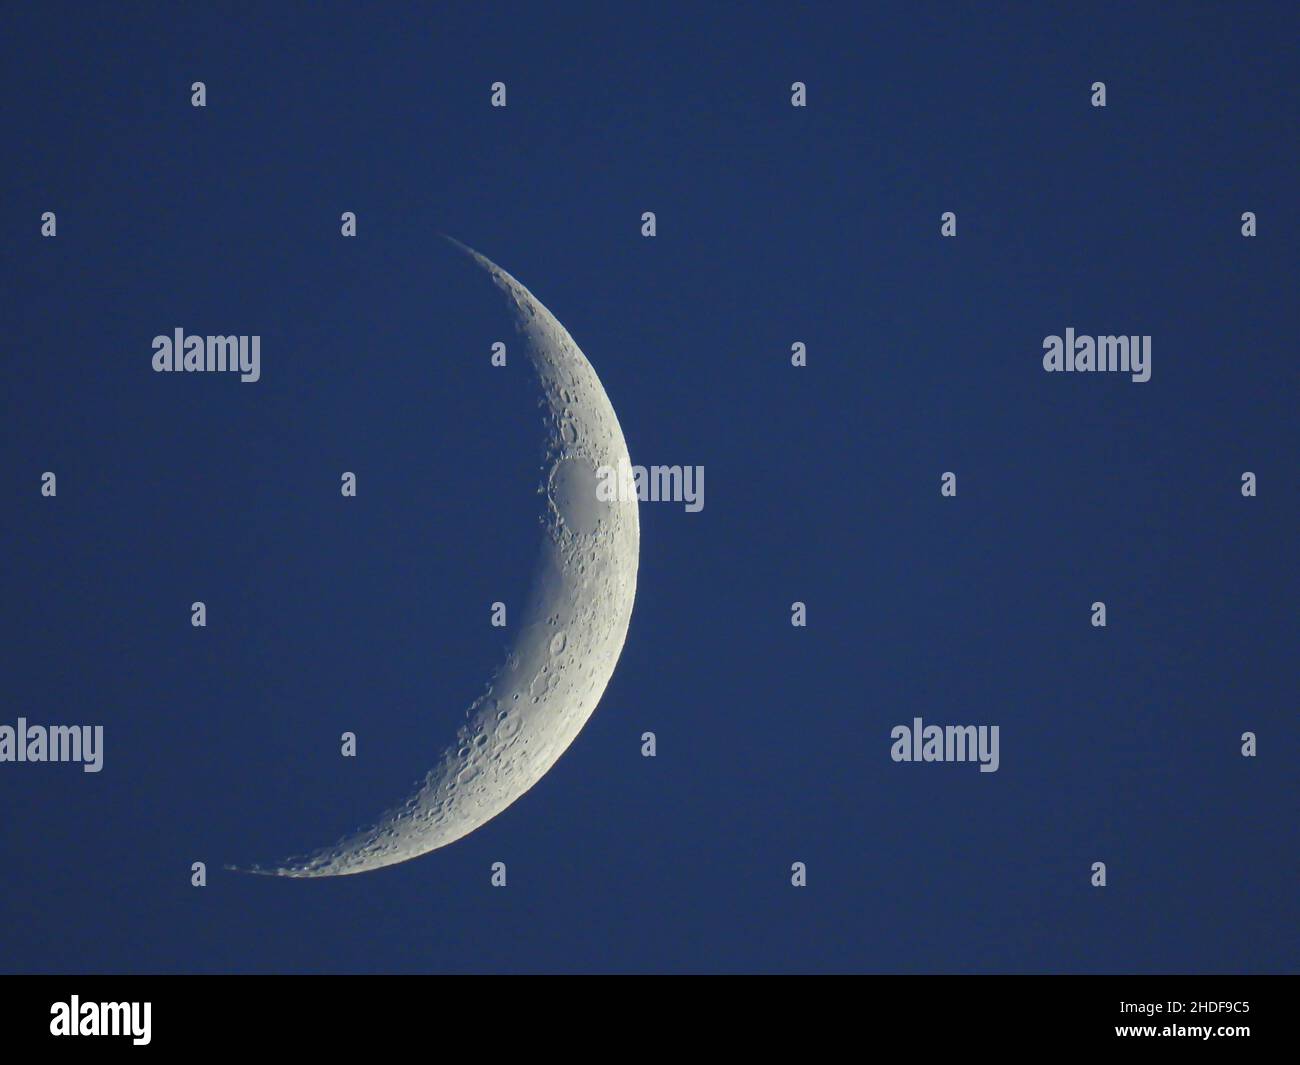 moon, planet, moon phases, moons, astronomy, planets Stock Photo